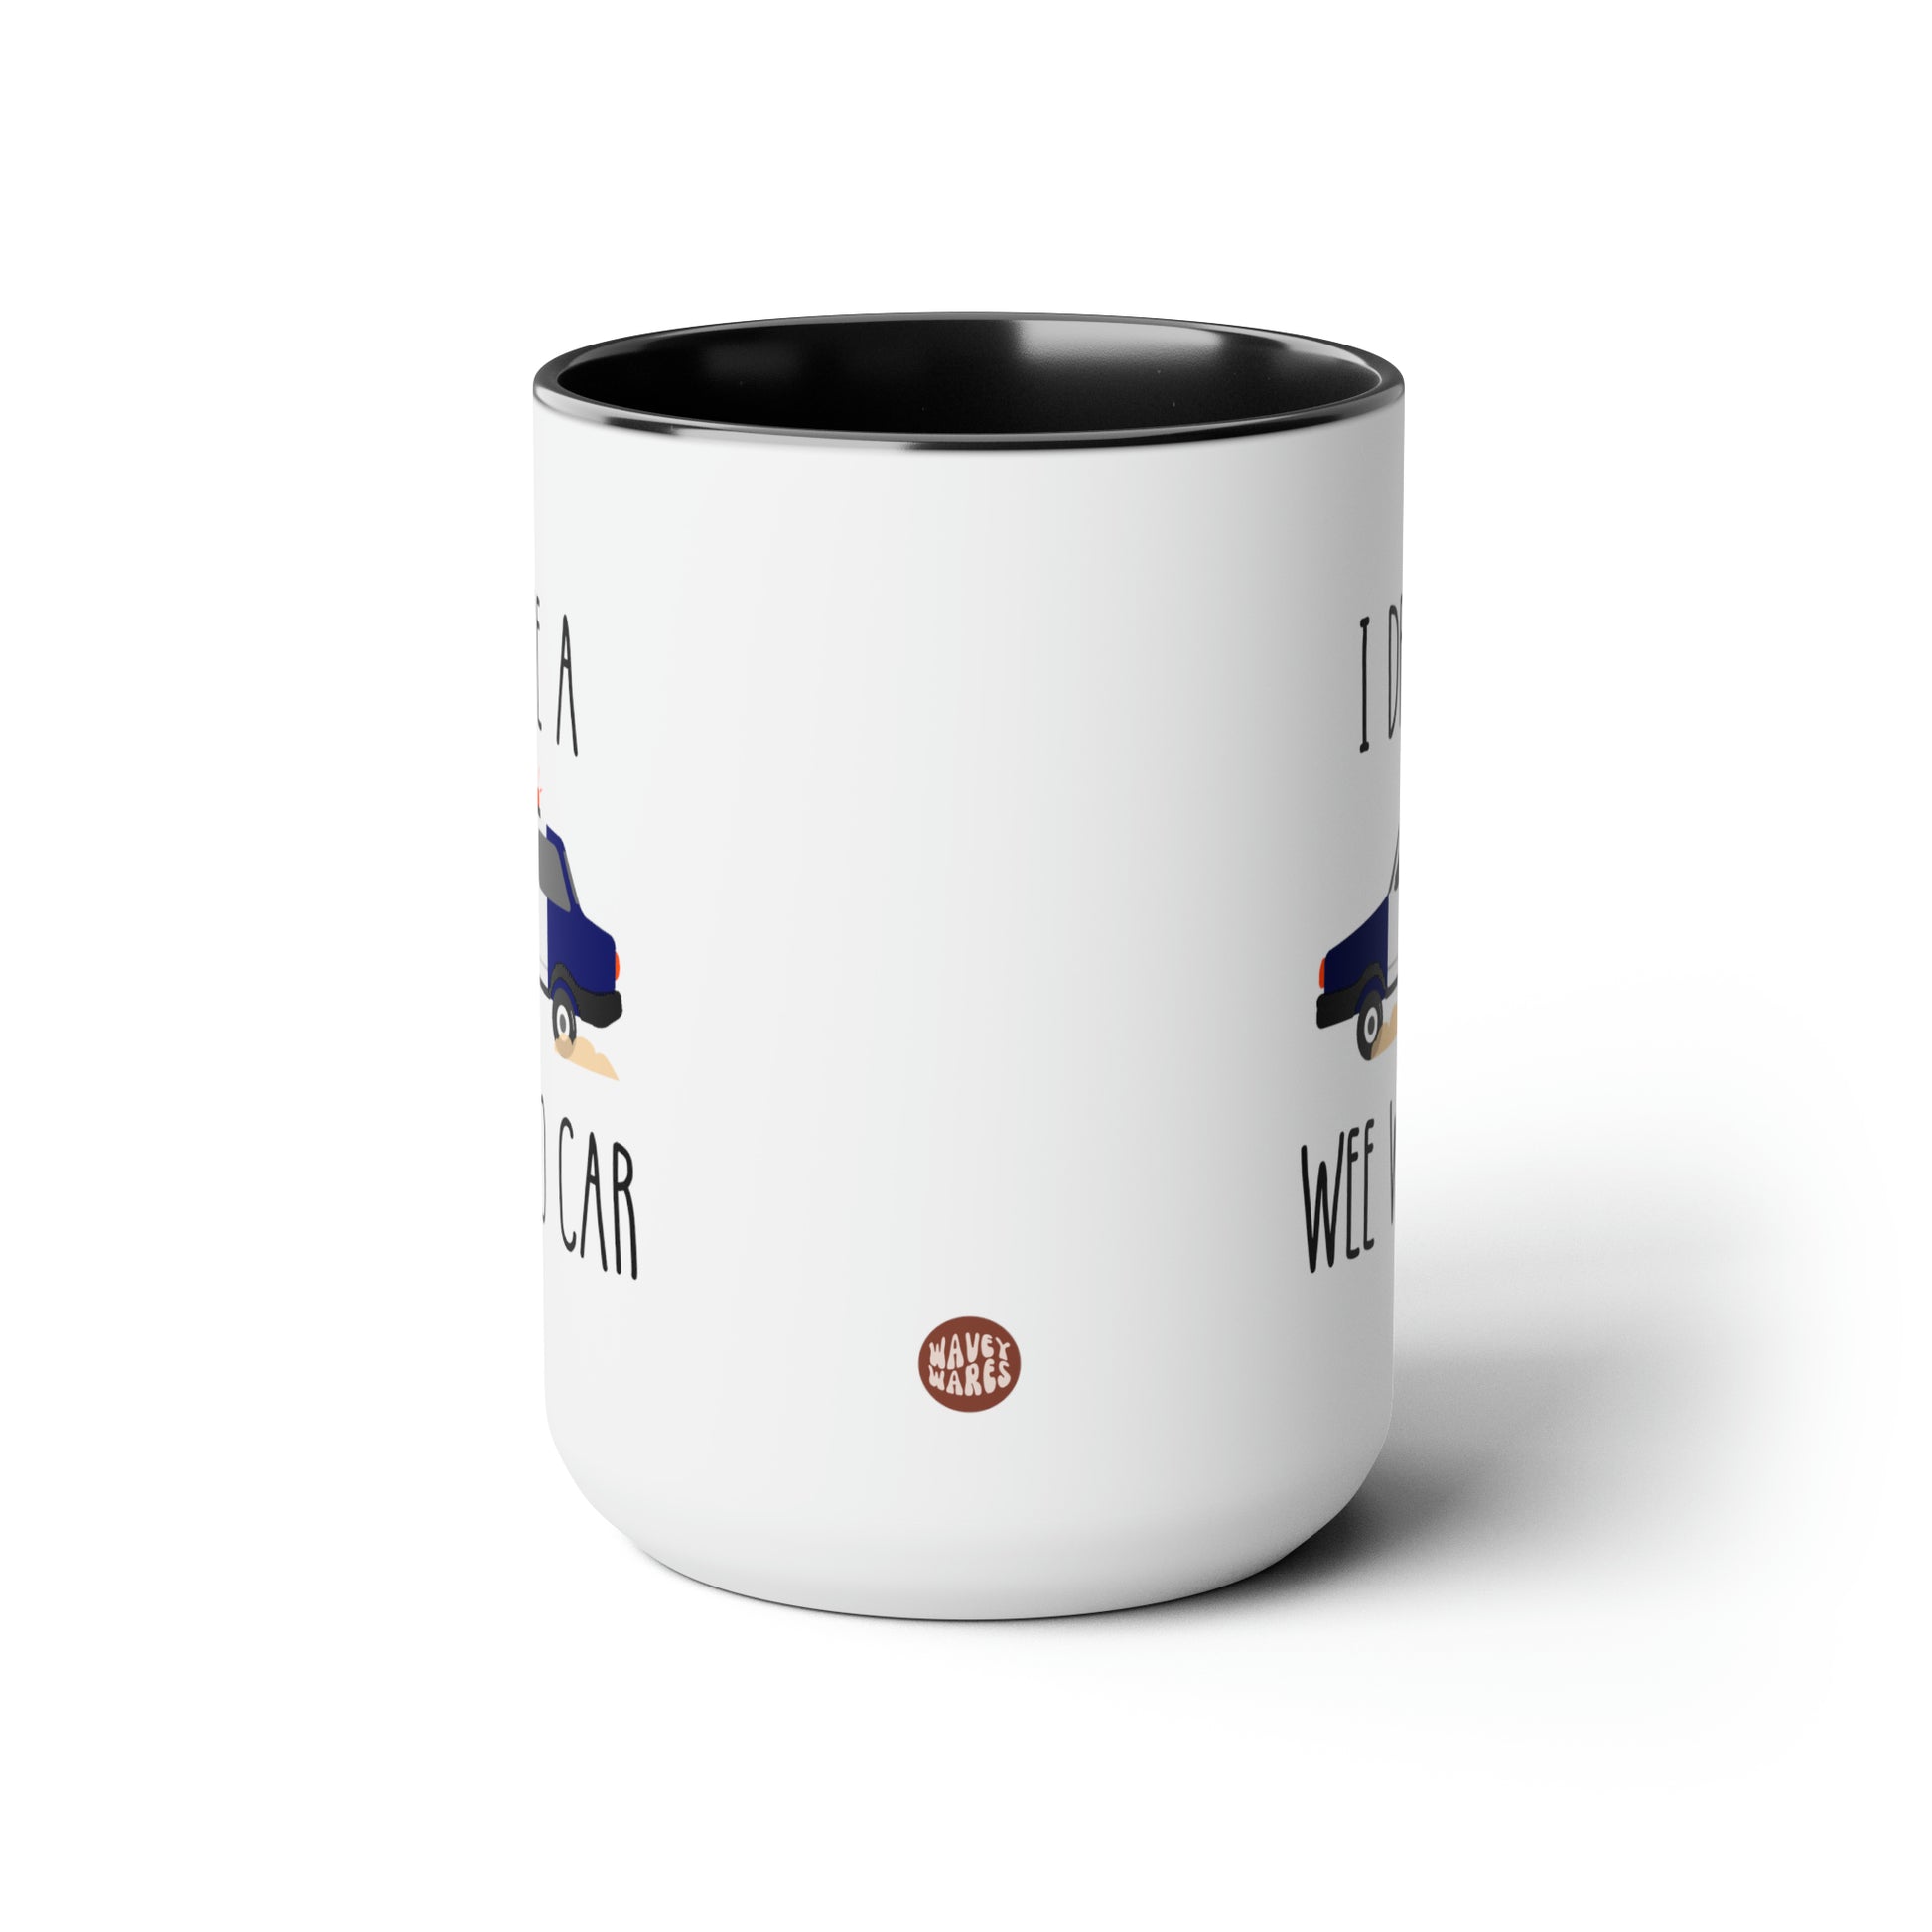 I Drive A Wee Woo Car 15oz white with black accent funny large coffee mug gift for police cop officer graduation birthday waveywares wavey wares wavywares wavy wares side